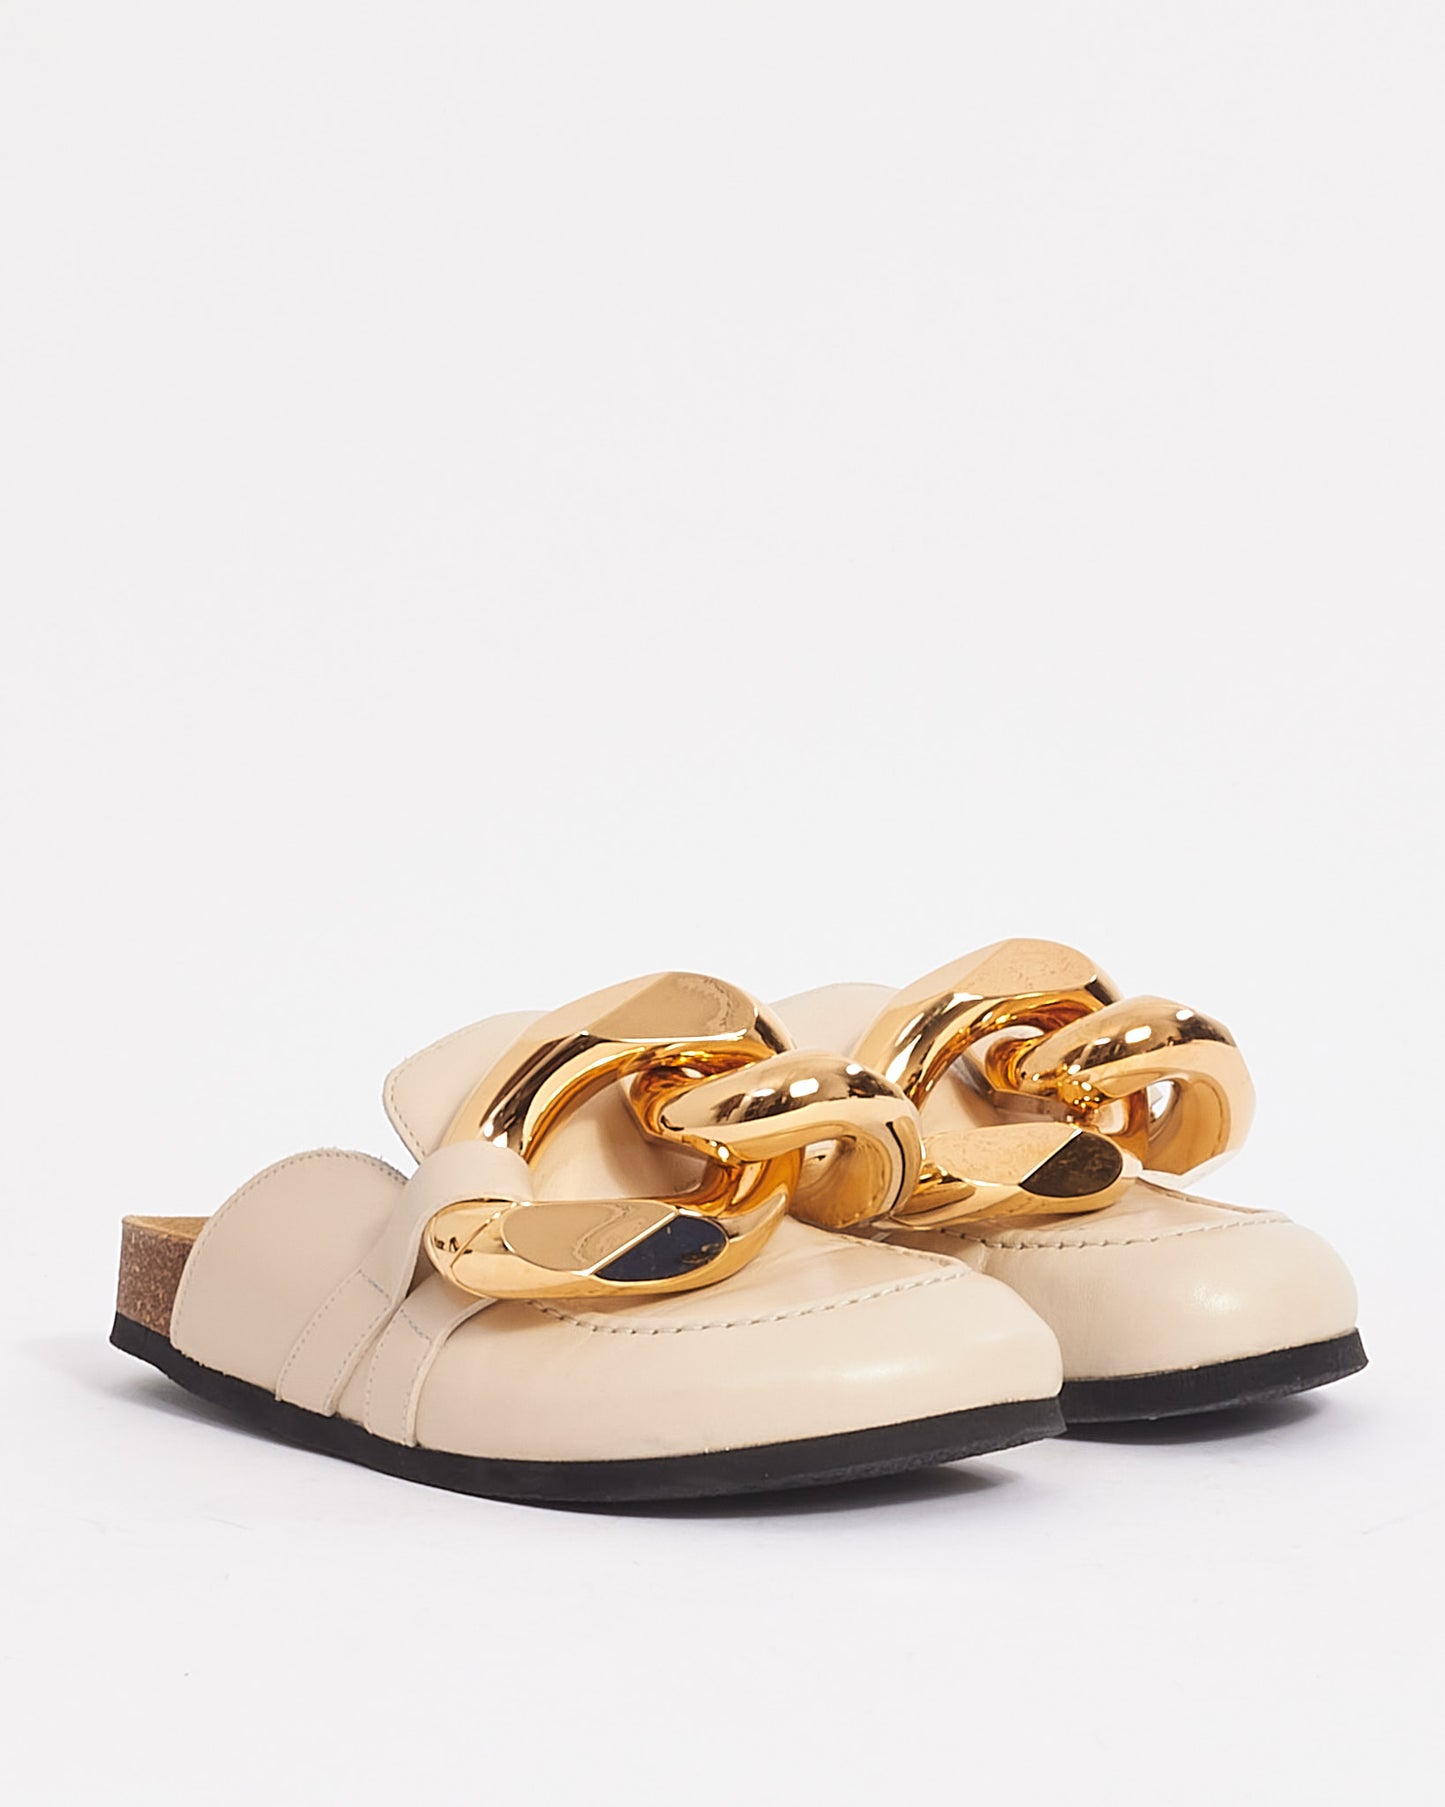 JW Anderson Beige Leather with Gold Chain Round Toe Leather Mules - 35